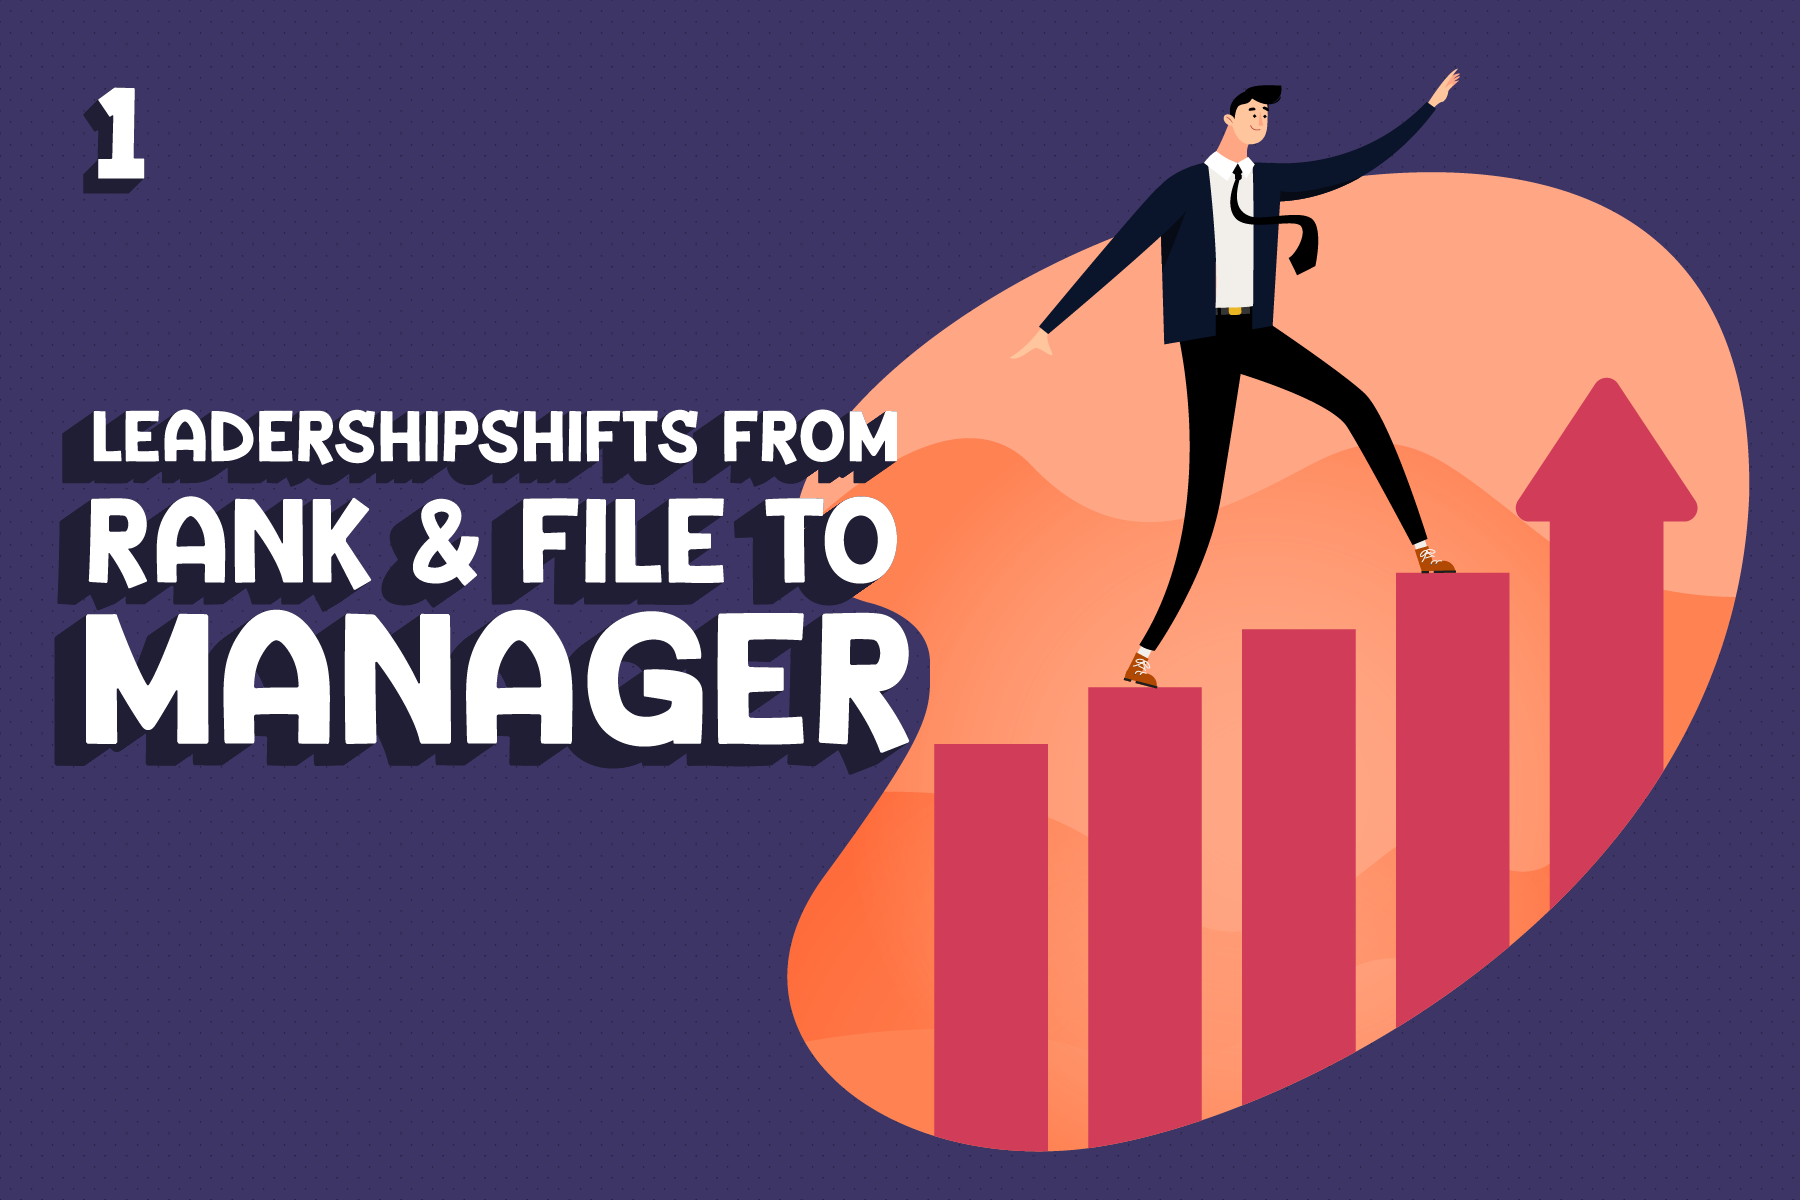 Module 1: Leadershipshifts From Rank & File To Manager